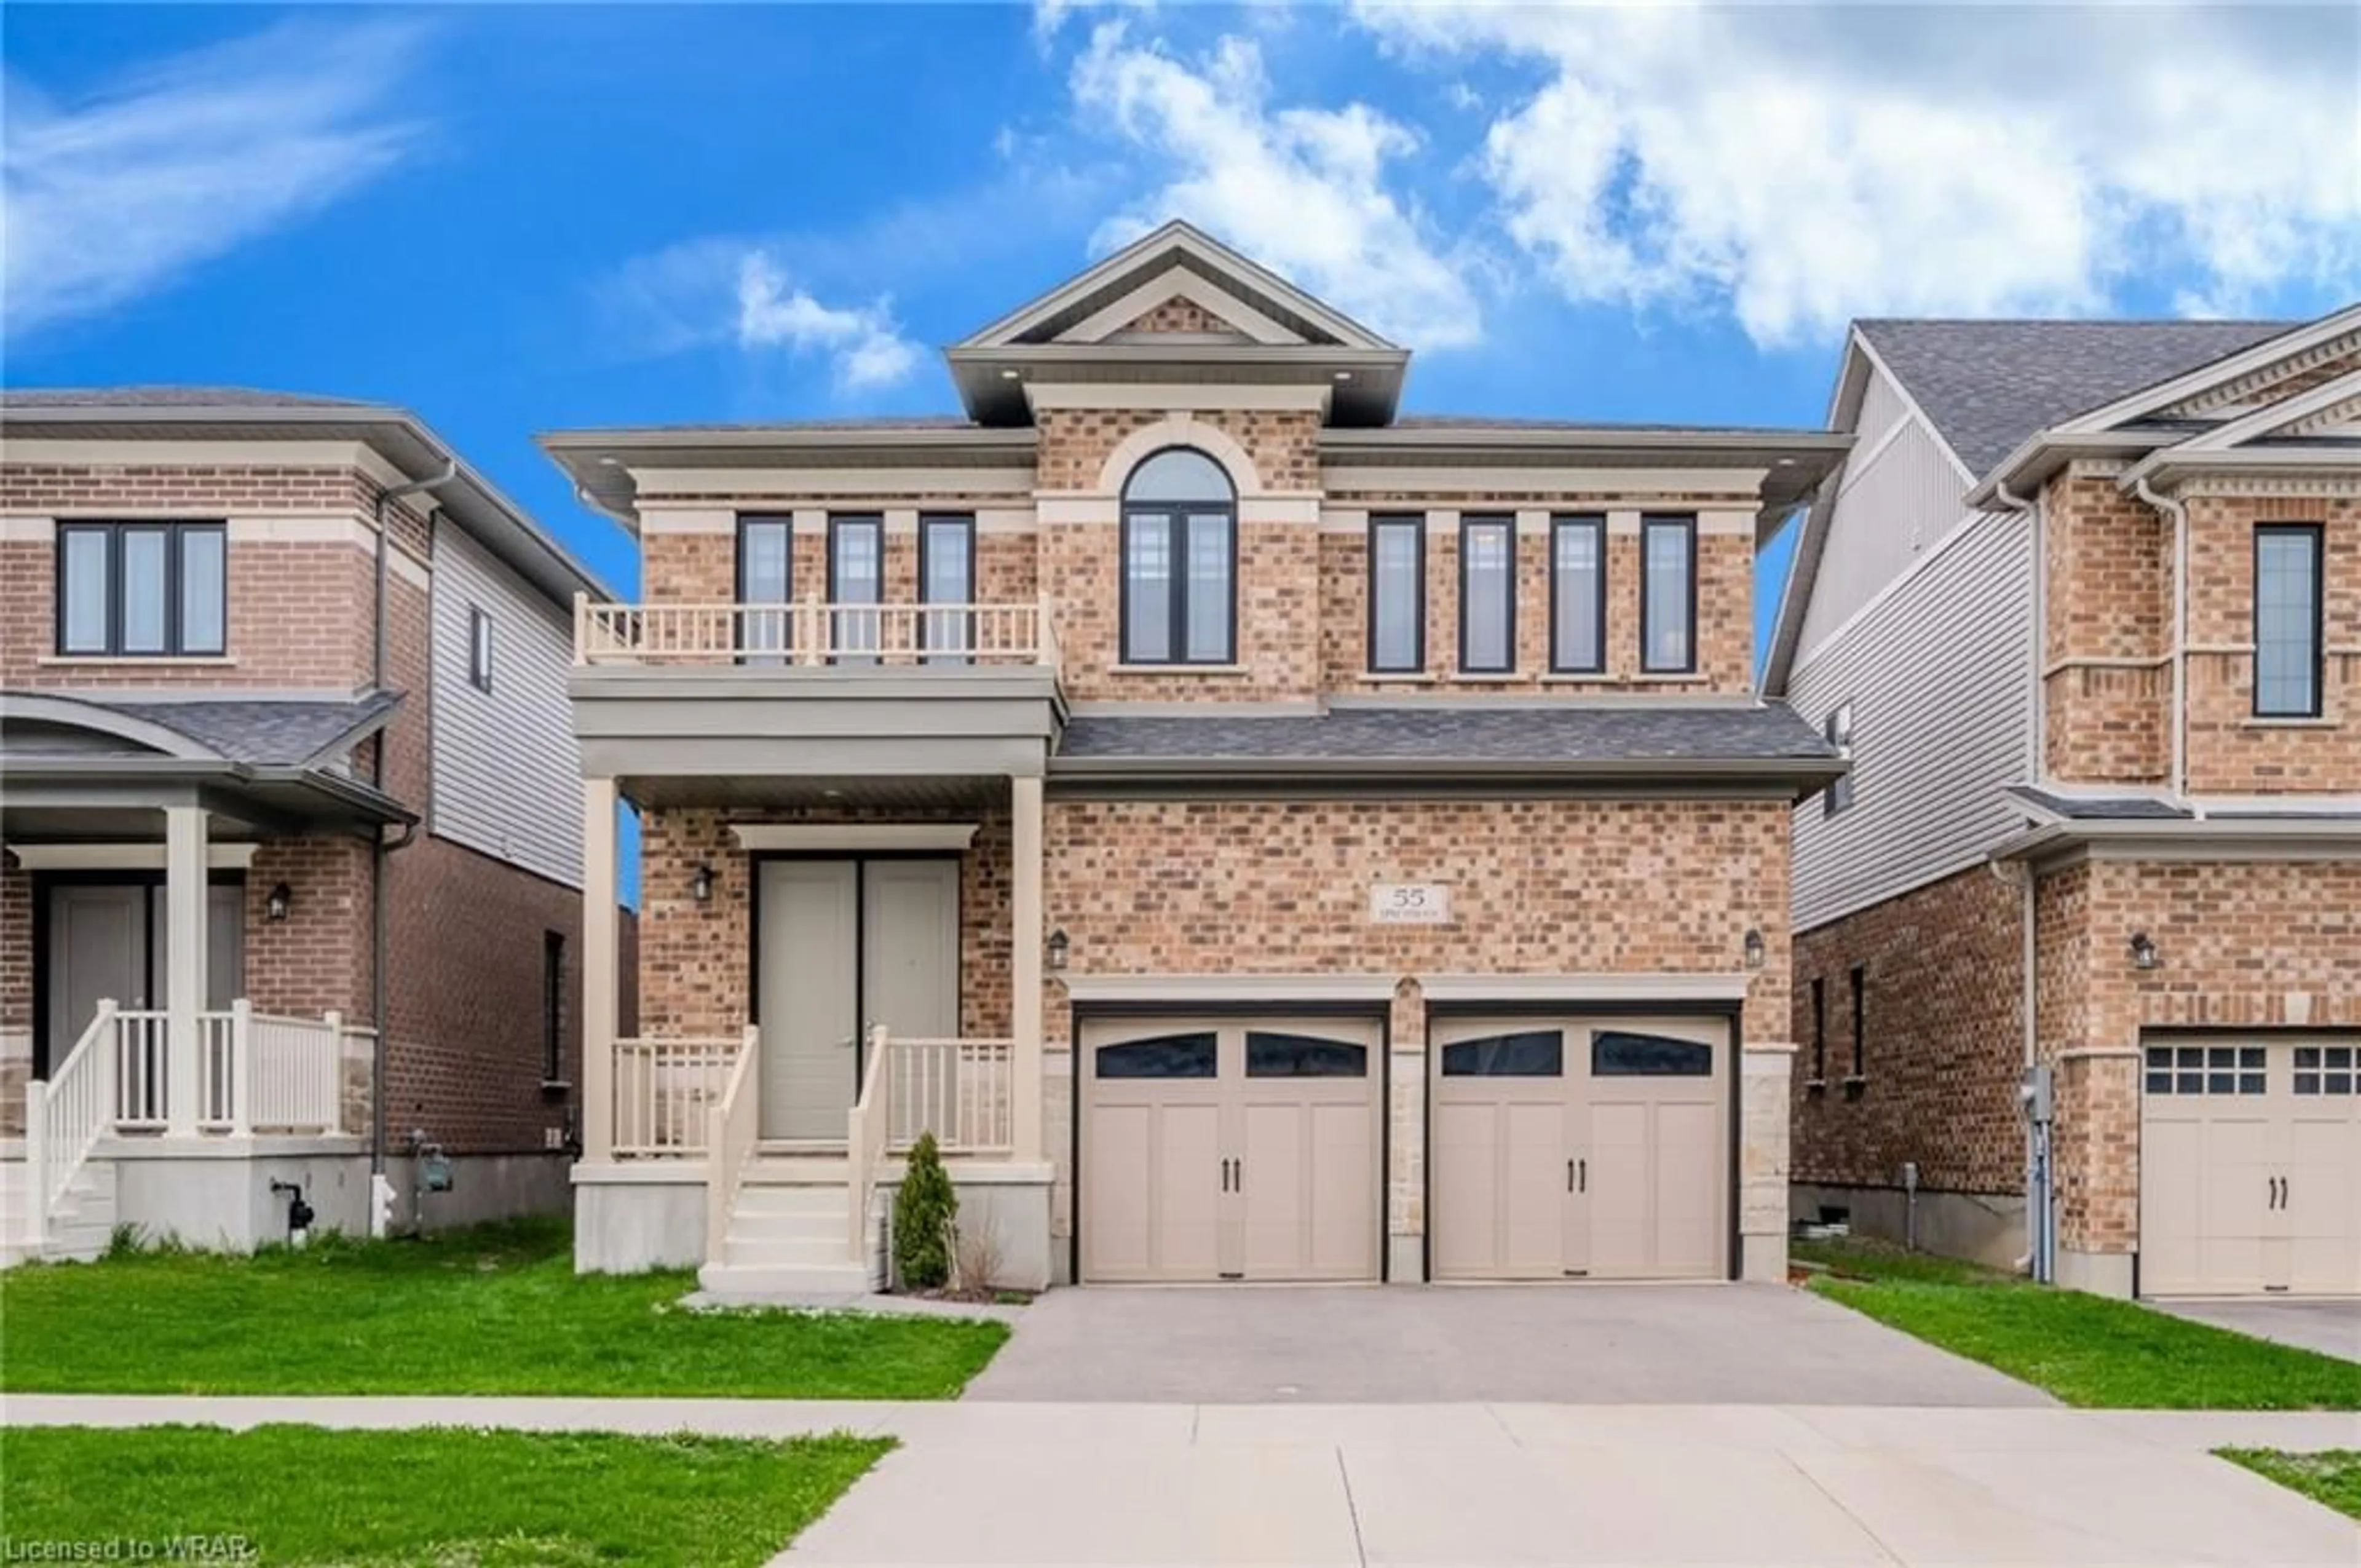 Home with brick exterior material for 55 Spachman Street St, Kitchener Ontario N2R 1R7